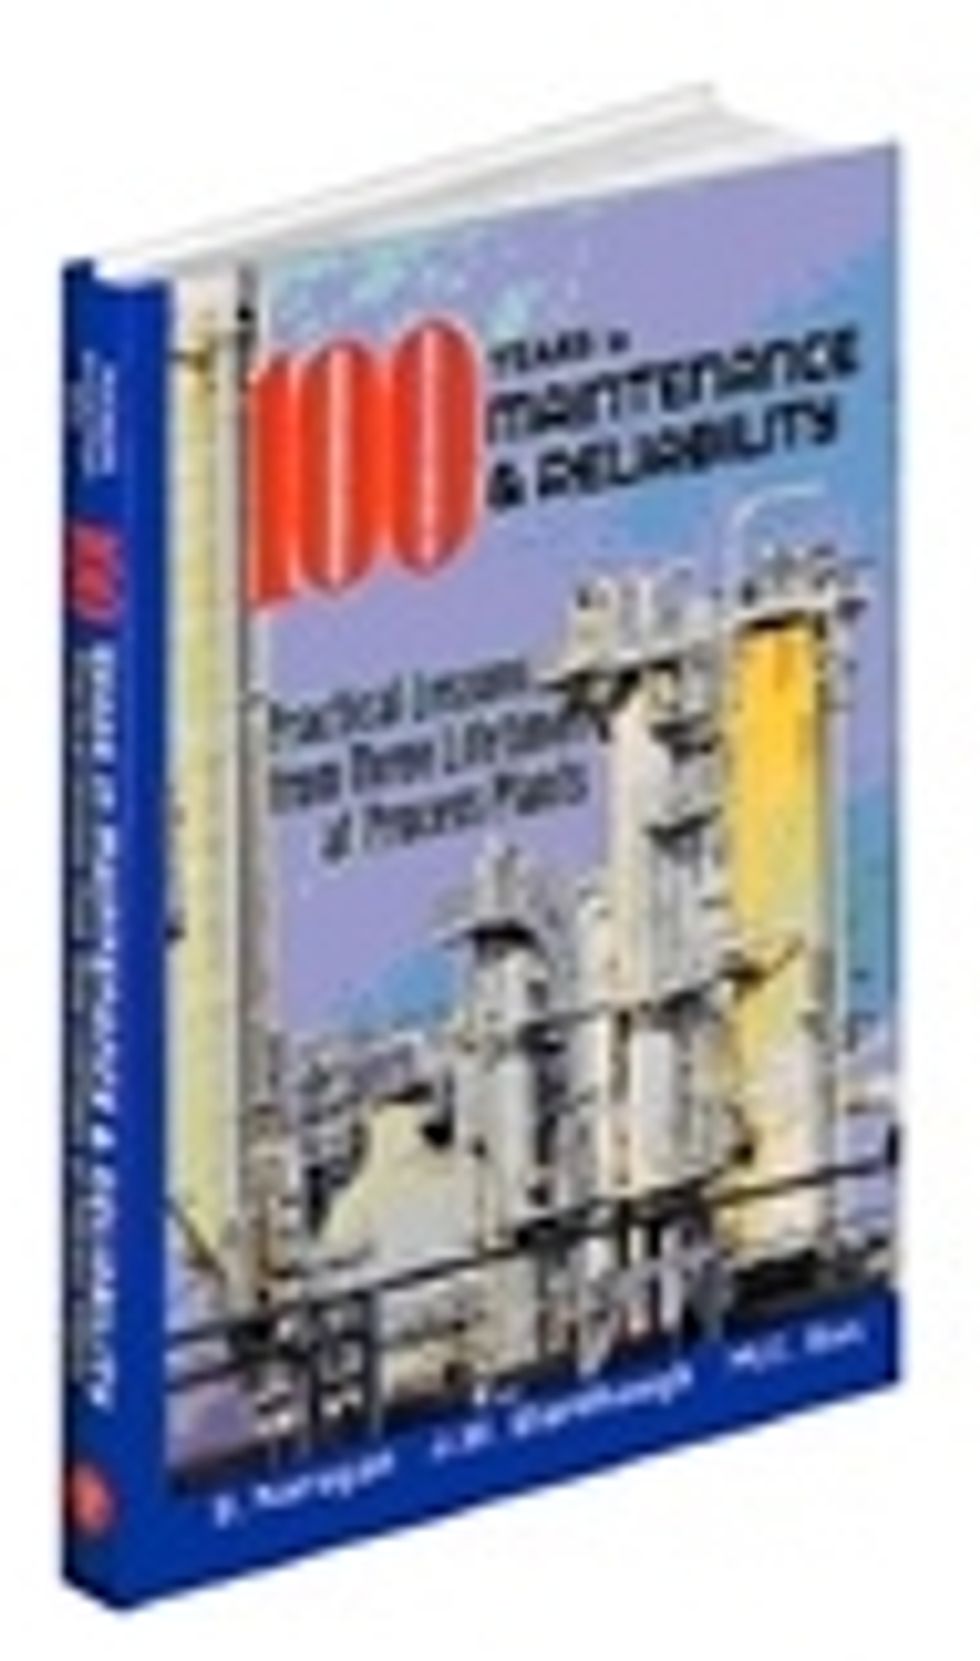 100 Years of Maintenance and Reliability: Practical Lessons from Three Lifetimes at Process Plants by V. Narayan, James W. Wardhaugh & Mahen C. Das